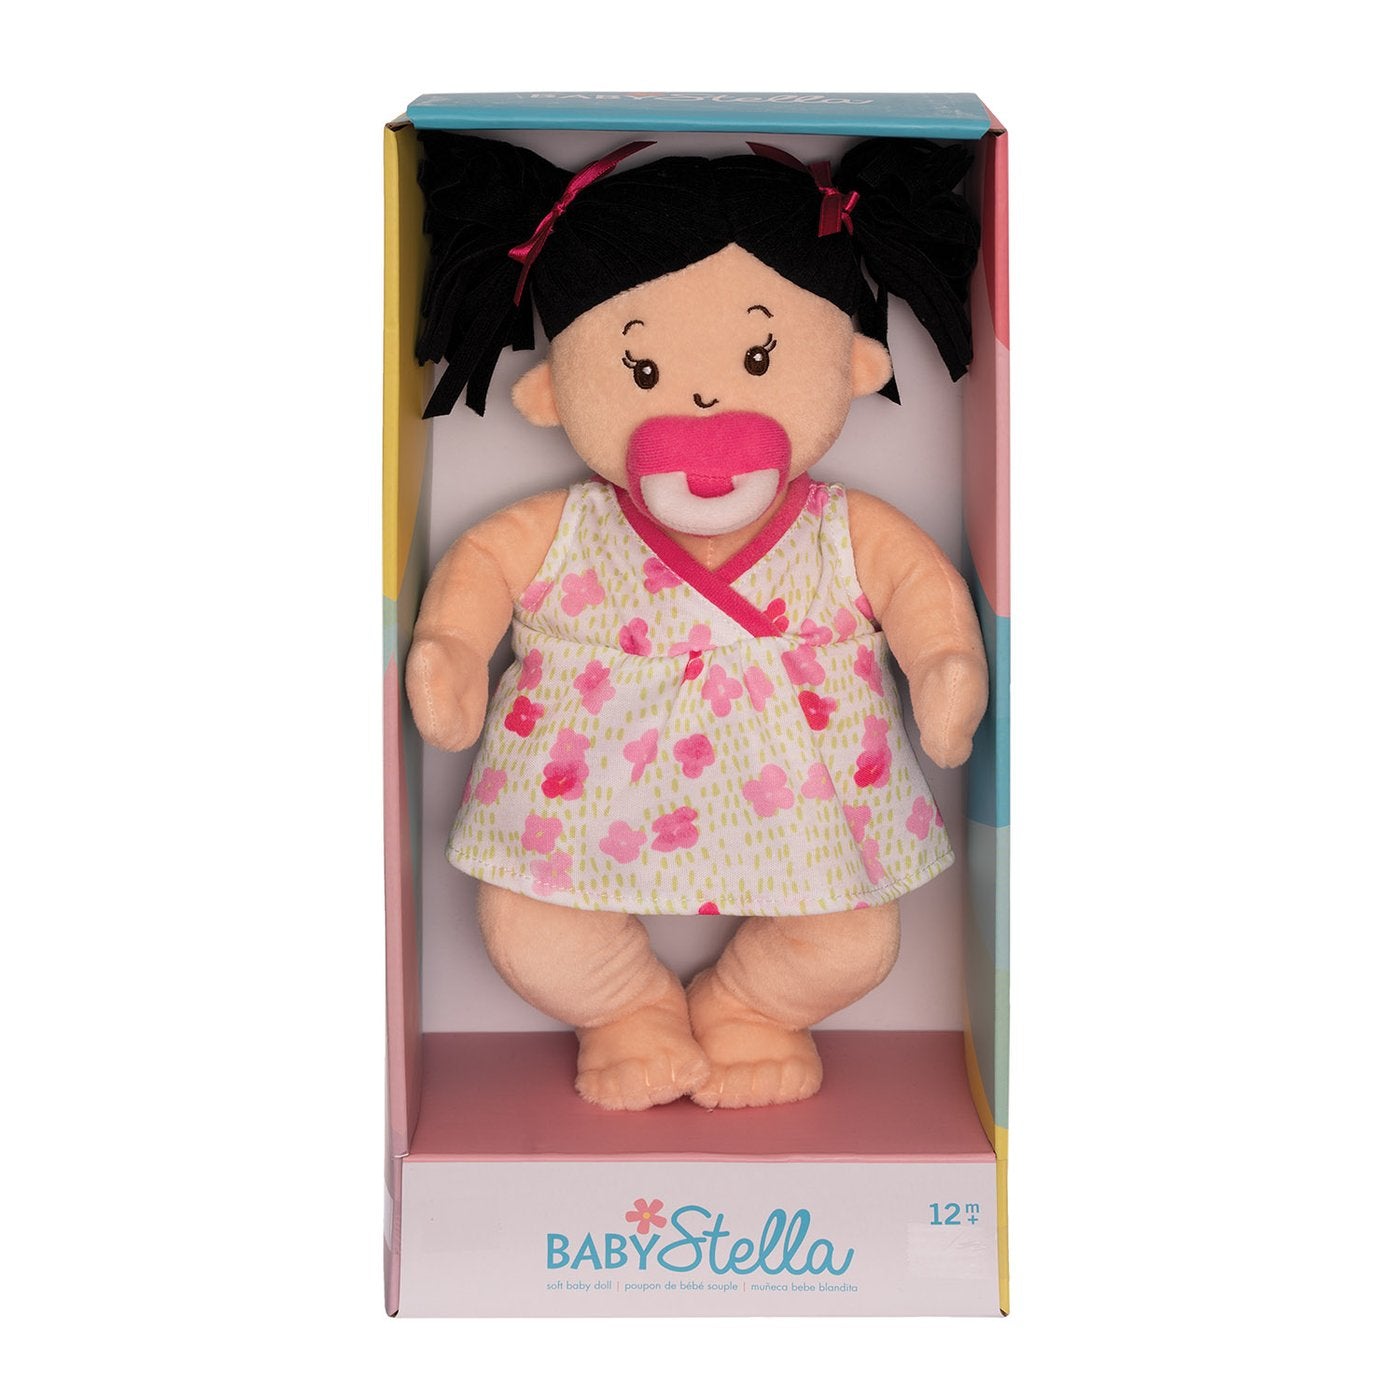 Manhattan Toy Baby Stella Peach Doll with Black Pigtails Toy In Box View- ANB Baby -